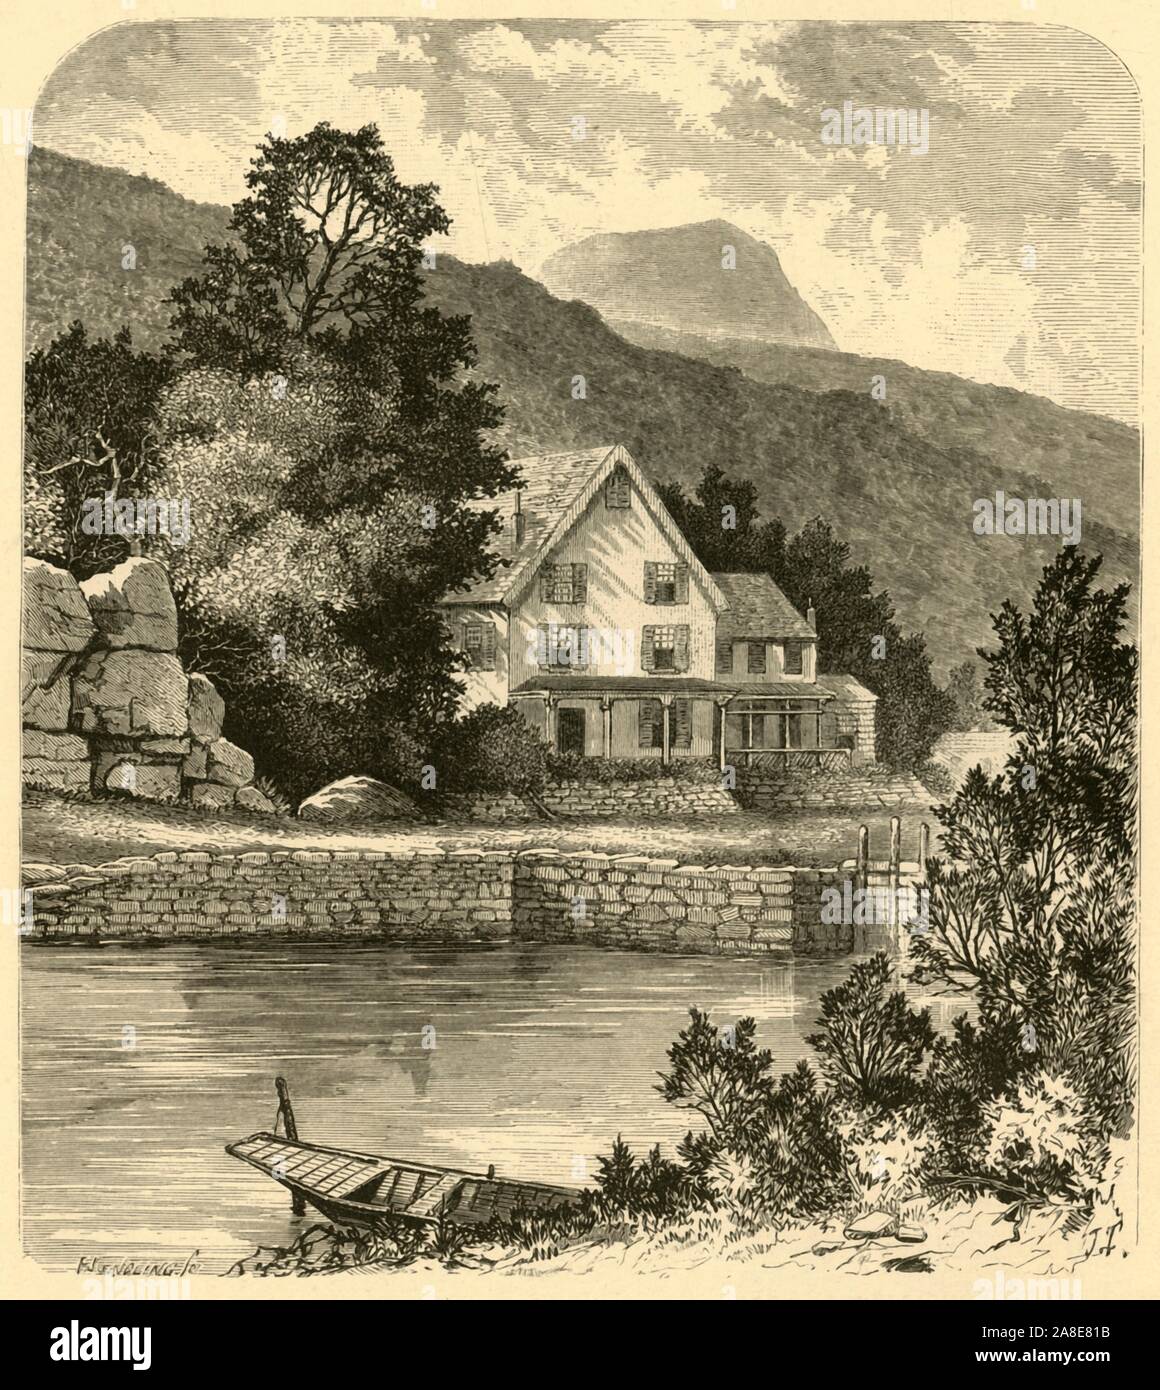 'Terrace House and Thorn Mountain', 1874. House with porch by a river in New Jersey, USA. '...Terrace House, which is overlooked by a towering mountain-peak...'. From &quot;Picturesque America; or, The Land We Live In, A Delineation by Pen and Pencil of the Mountains, Rivers, Lakes...with Illustrations on Steel and Wood by Eminent American Artists&quot; Vol. II, edited by William Cullen Bryant. [D. Appleton and Company, New York, 1874] Stock Photo